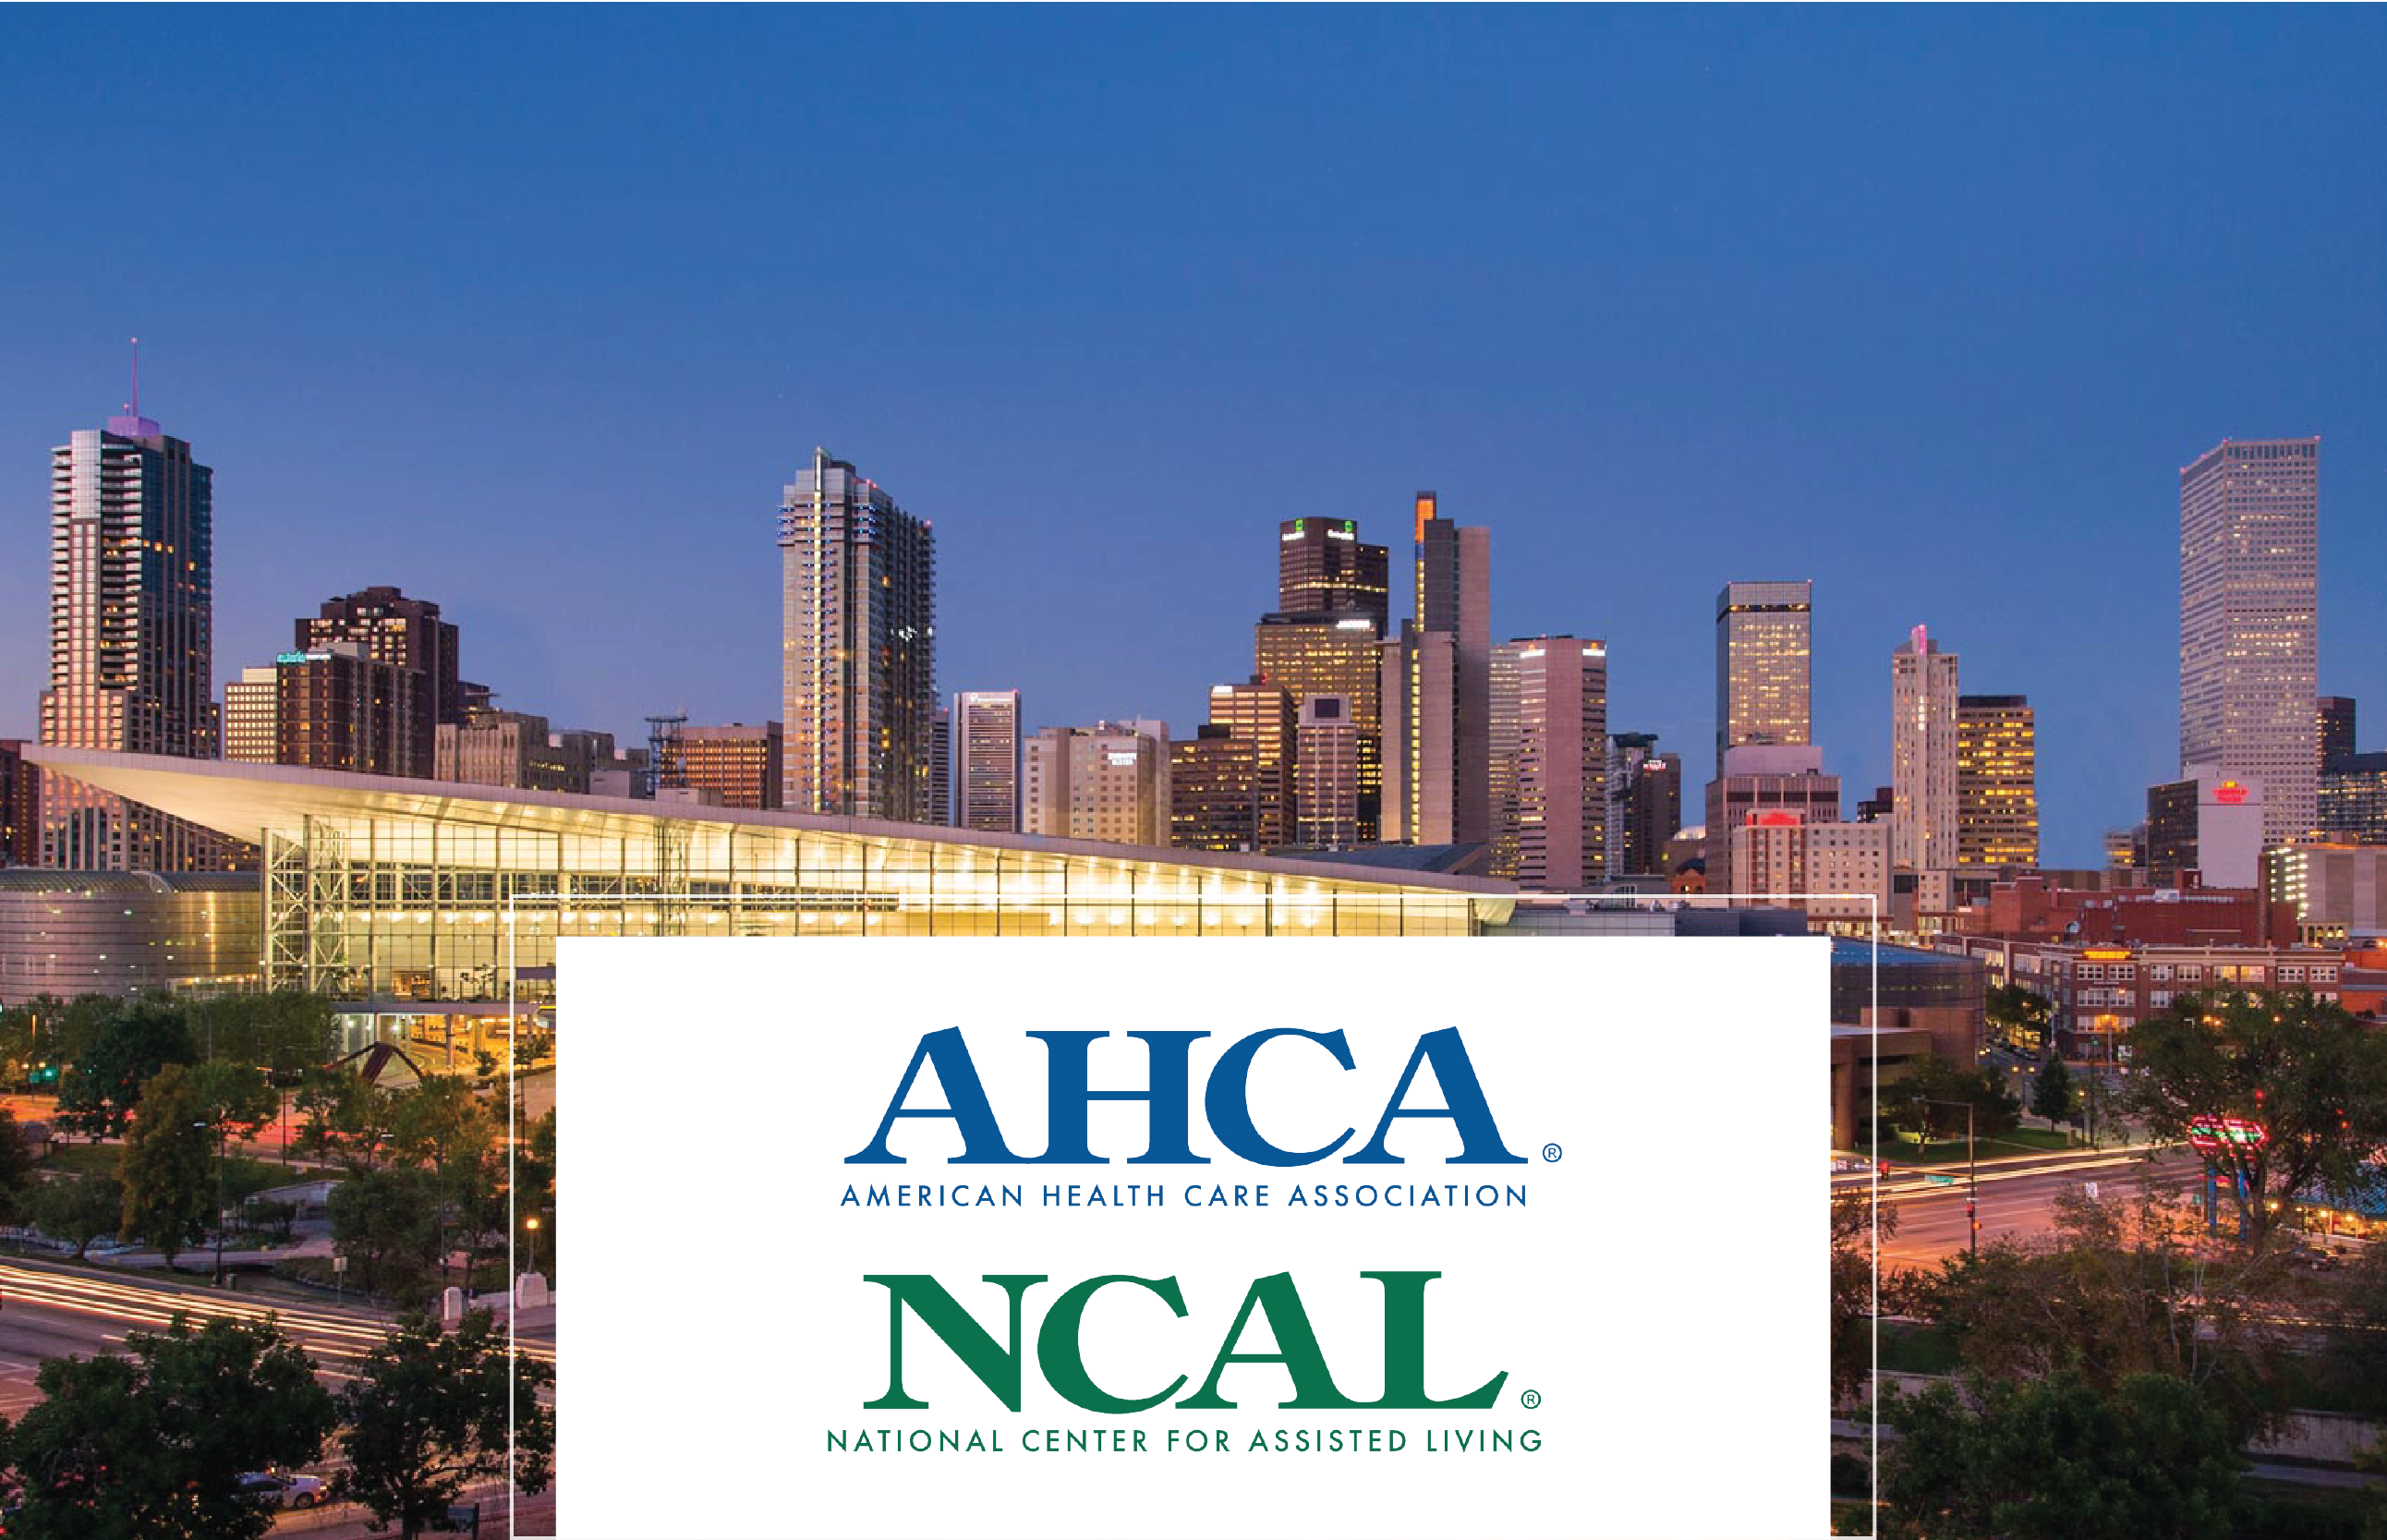 Annual AHCA/NCAL Convention & Expo CPS